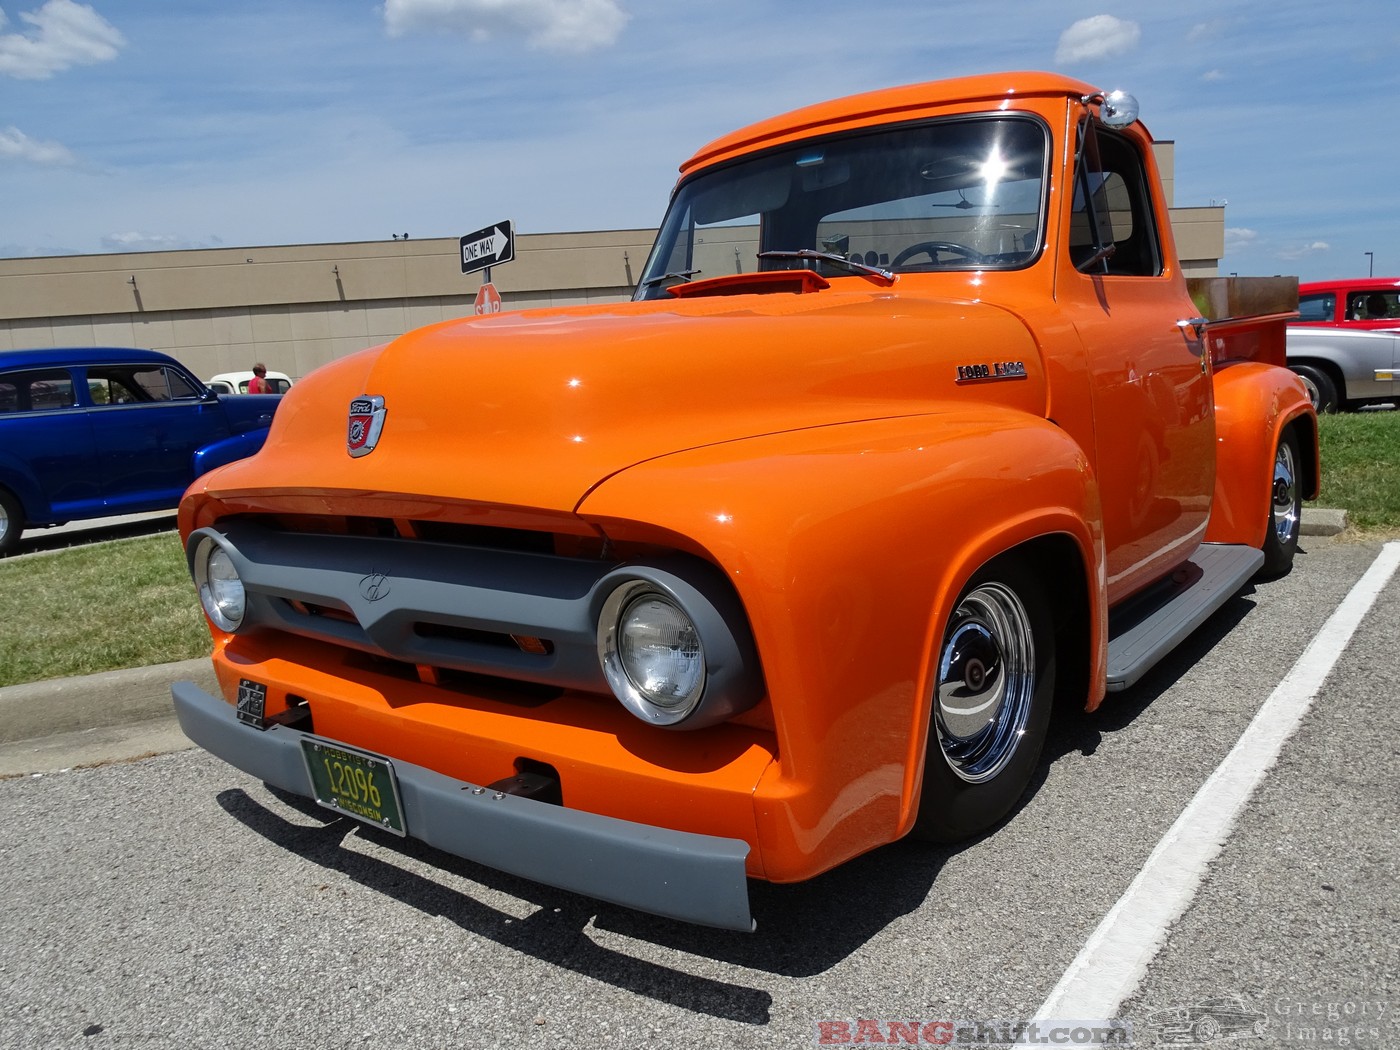 2017 NSRA Nationals Gallery: Pickup Trucks, Vans, Station Wagons, and Utility Vehicles Galore